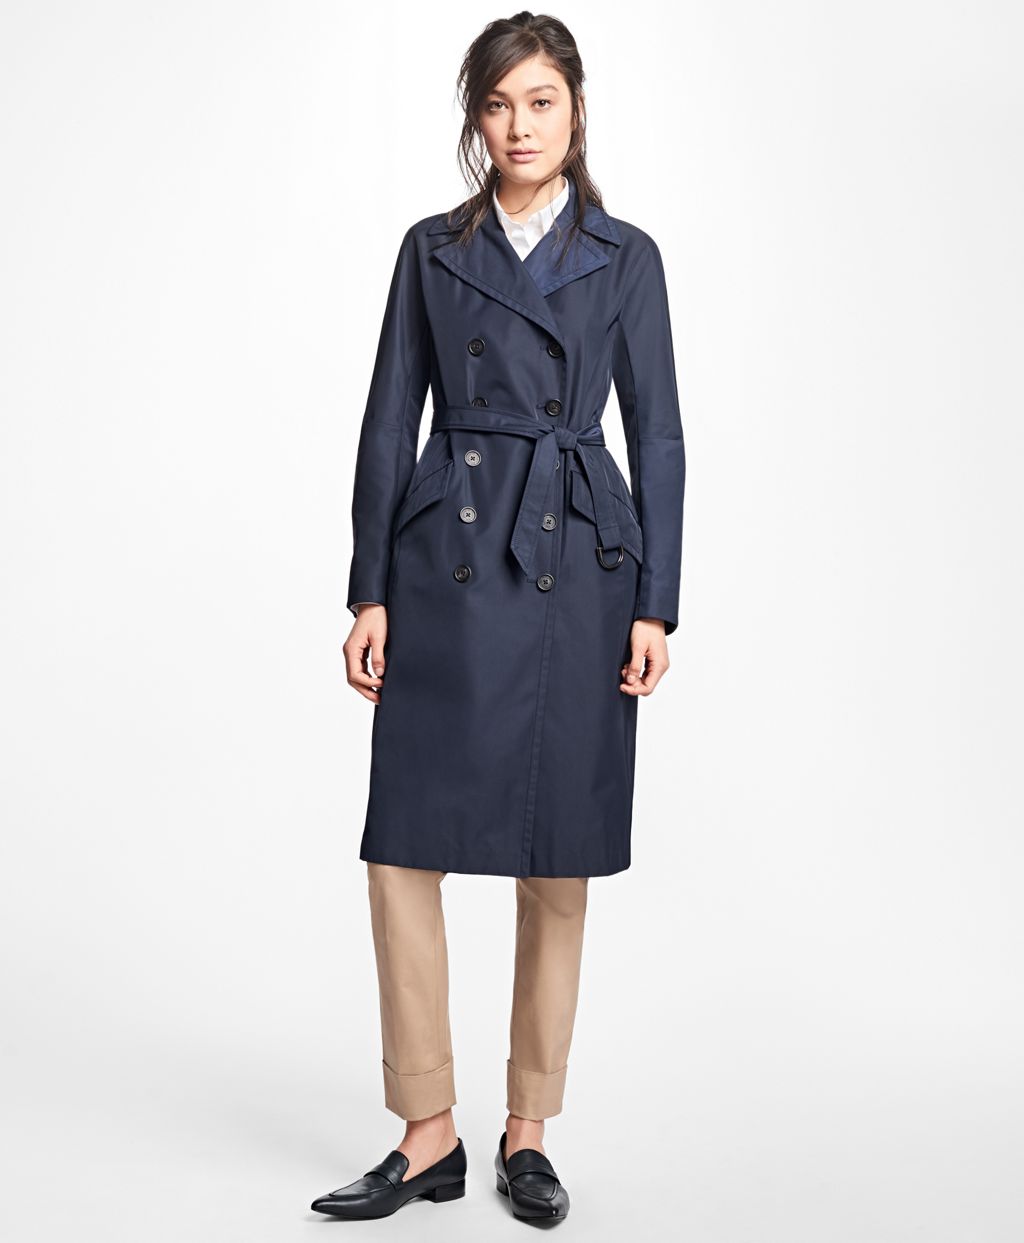 Brooks Brothers Women's Petite Water-Resistant Double-Faced Twill Trench Coat | Brooks Brothers